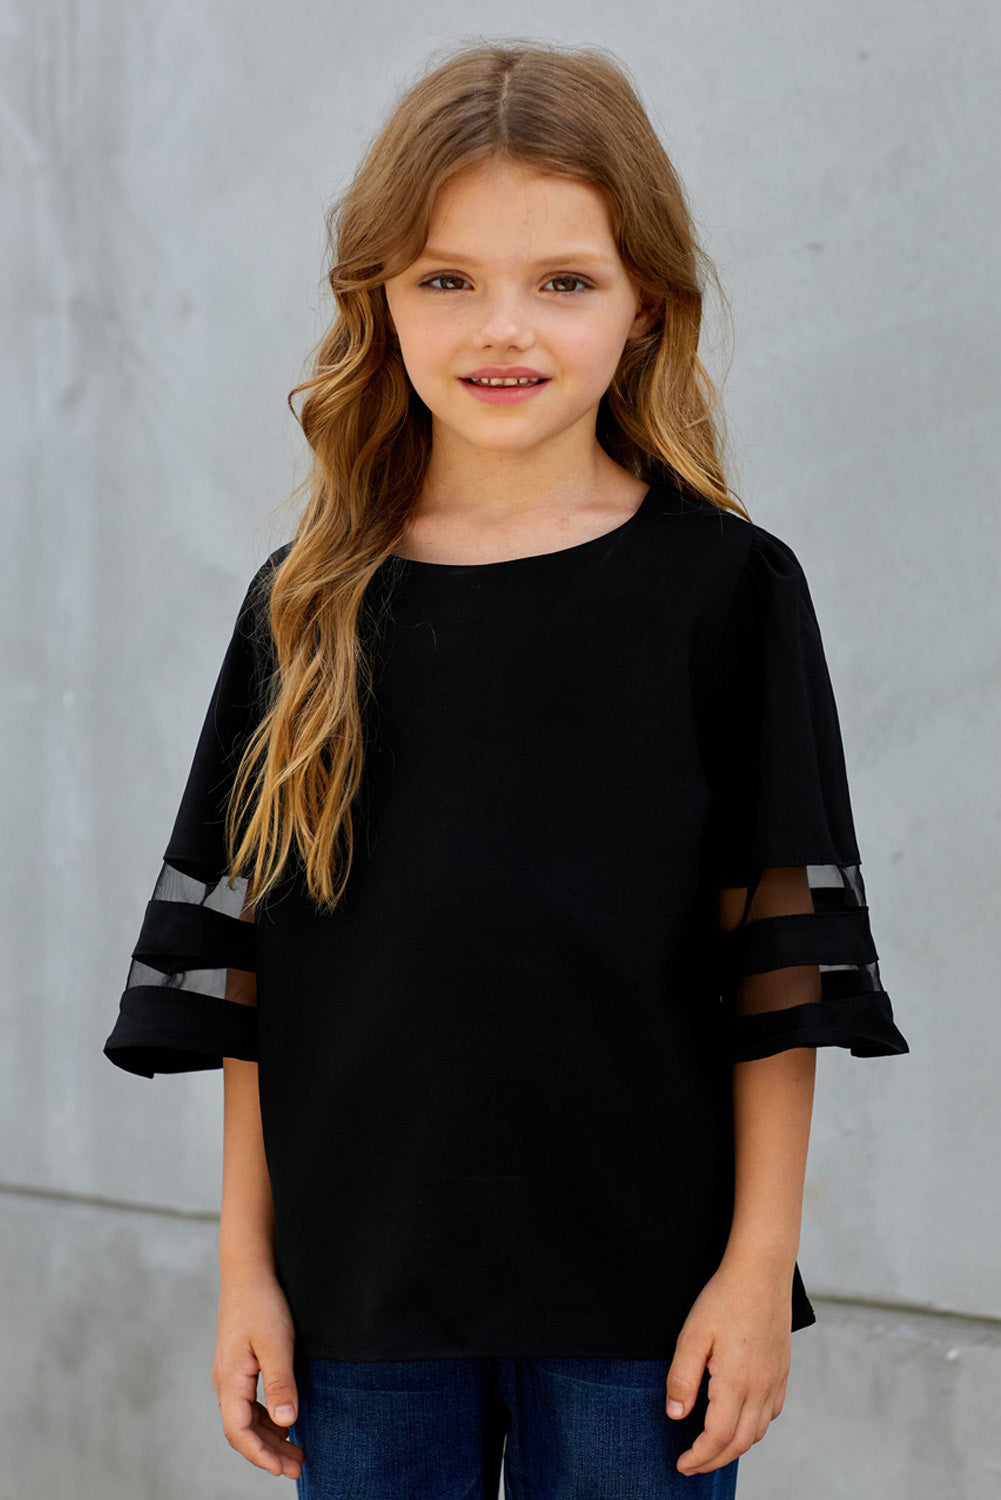 Girls Sheer Striped Flare Sleeve Tee Shirt, Availble in Black or White, Sizes 4T - 12